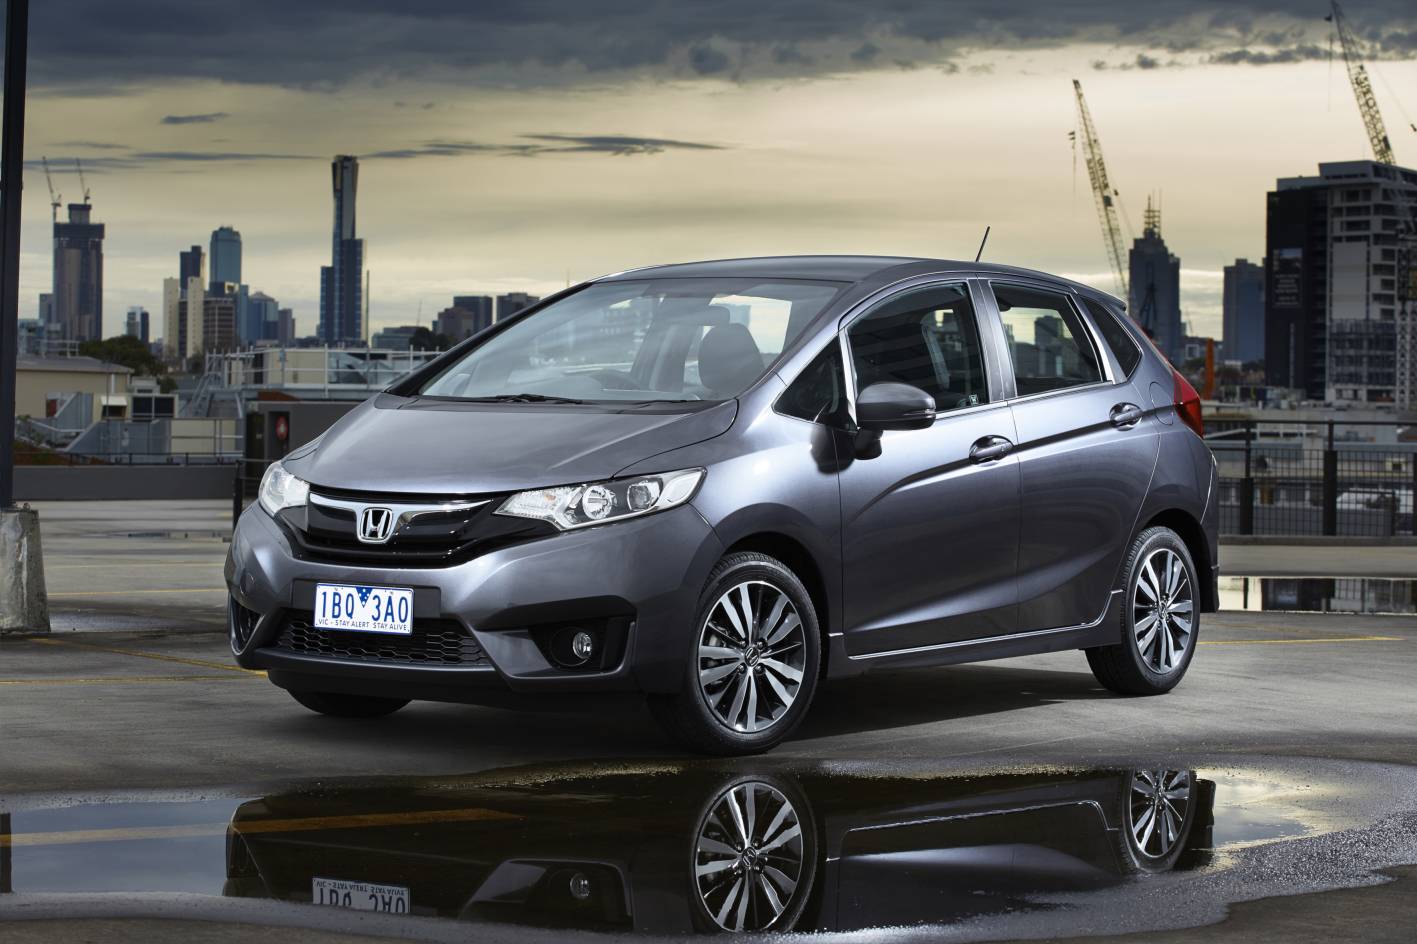 2015 Honda Jazz now on sale from $14,990